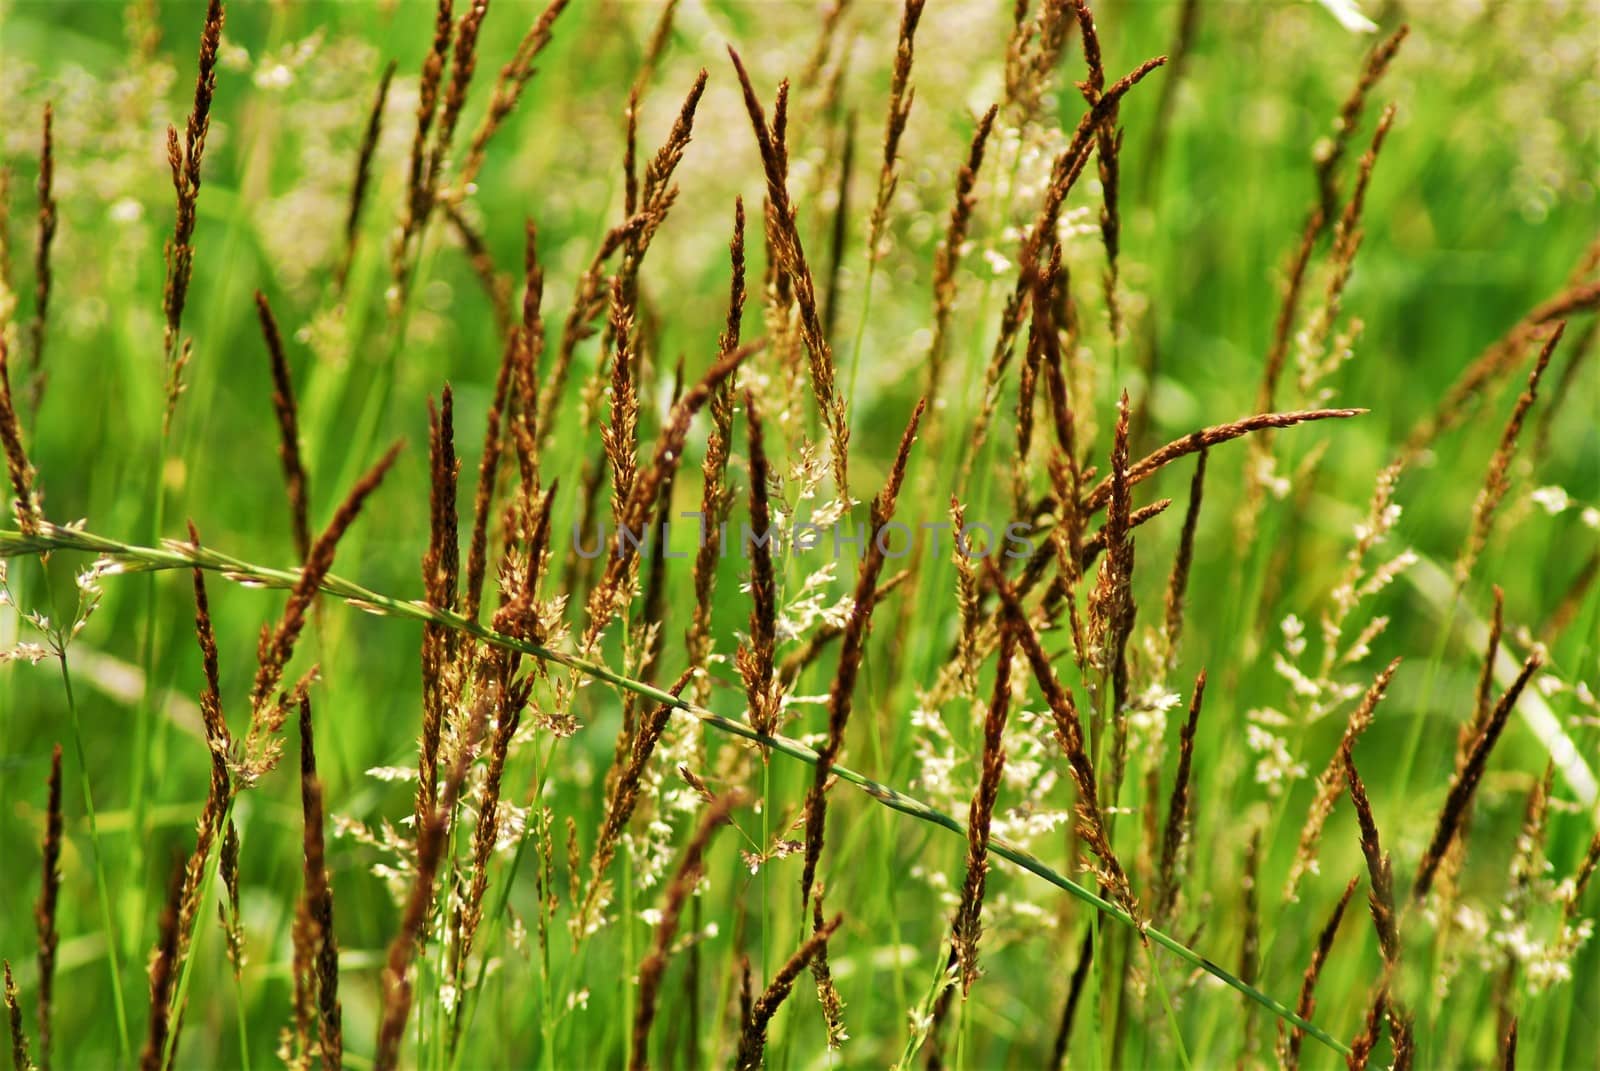 Some brown tall grasses against a green background